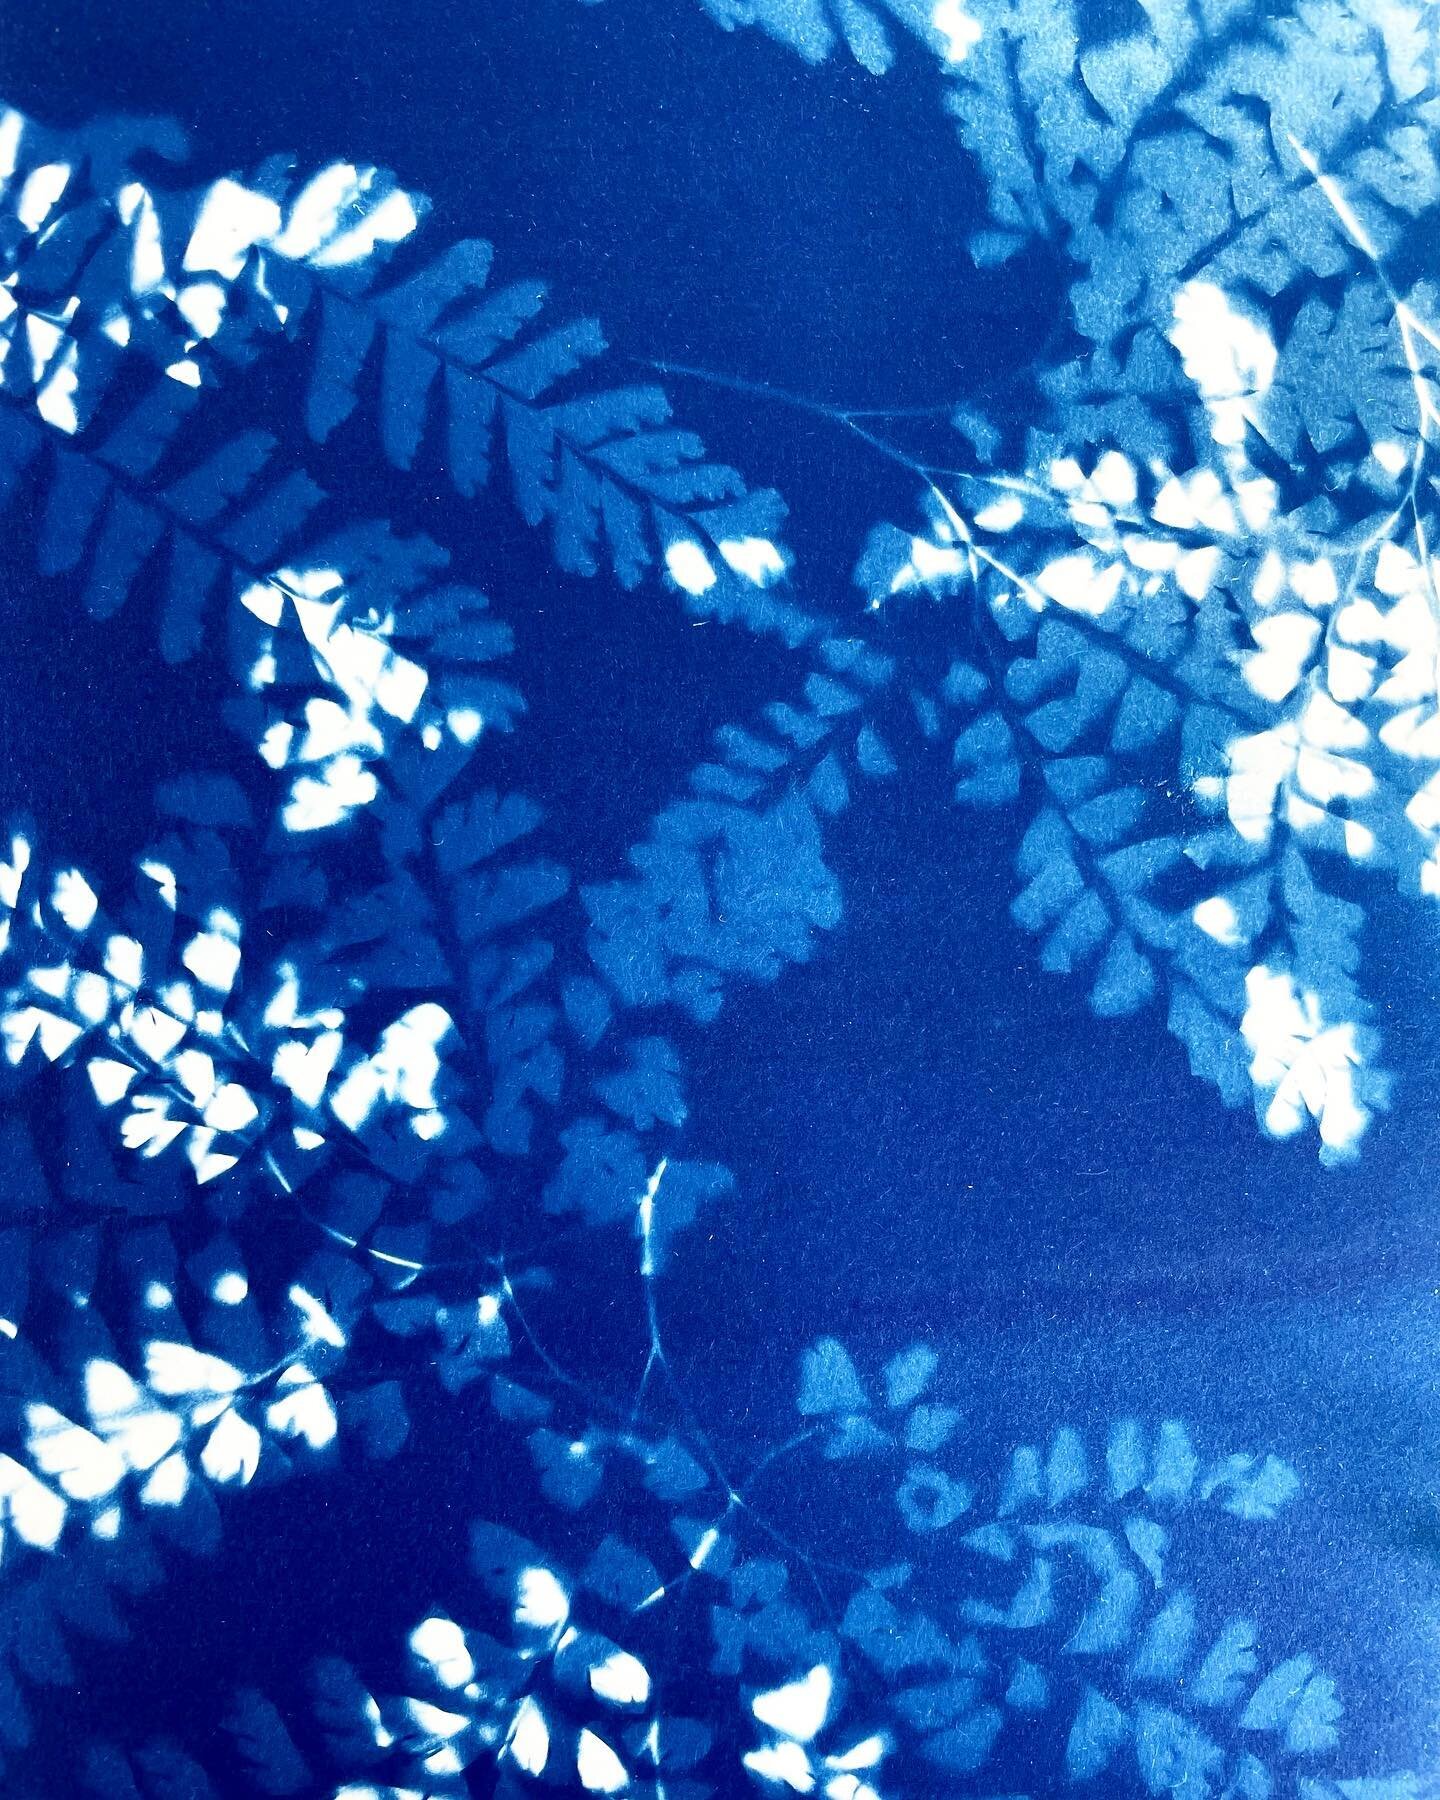 Some of my favorite cyanotype prints, turned into hand bound journals. Empty pages ready to be utilized for words or creation&hellip;check out the new batch in the shop! 💙

Image 1 - N. Maidenhair Fern
Image 2 - Silver Maple
Image 3 - Interrupted Fe